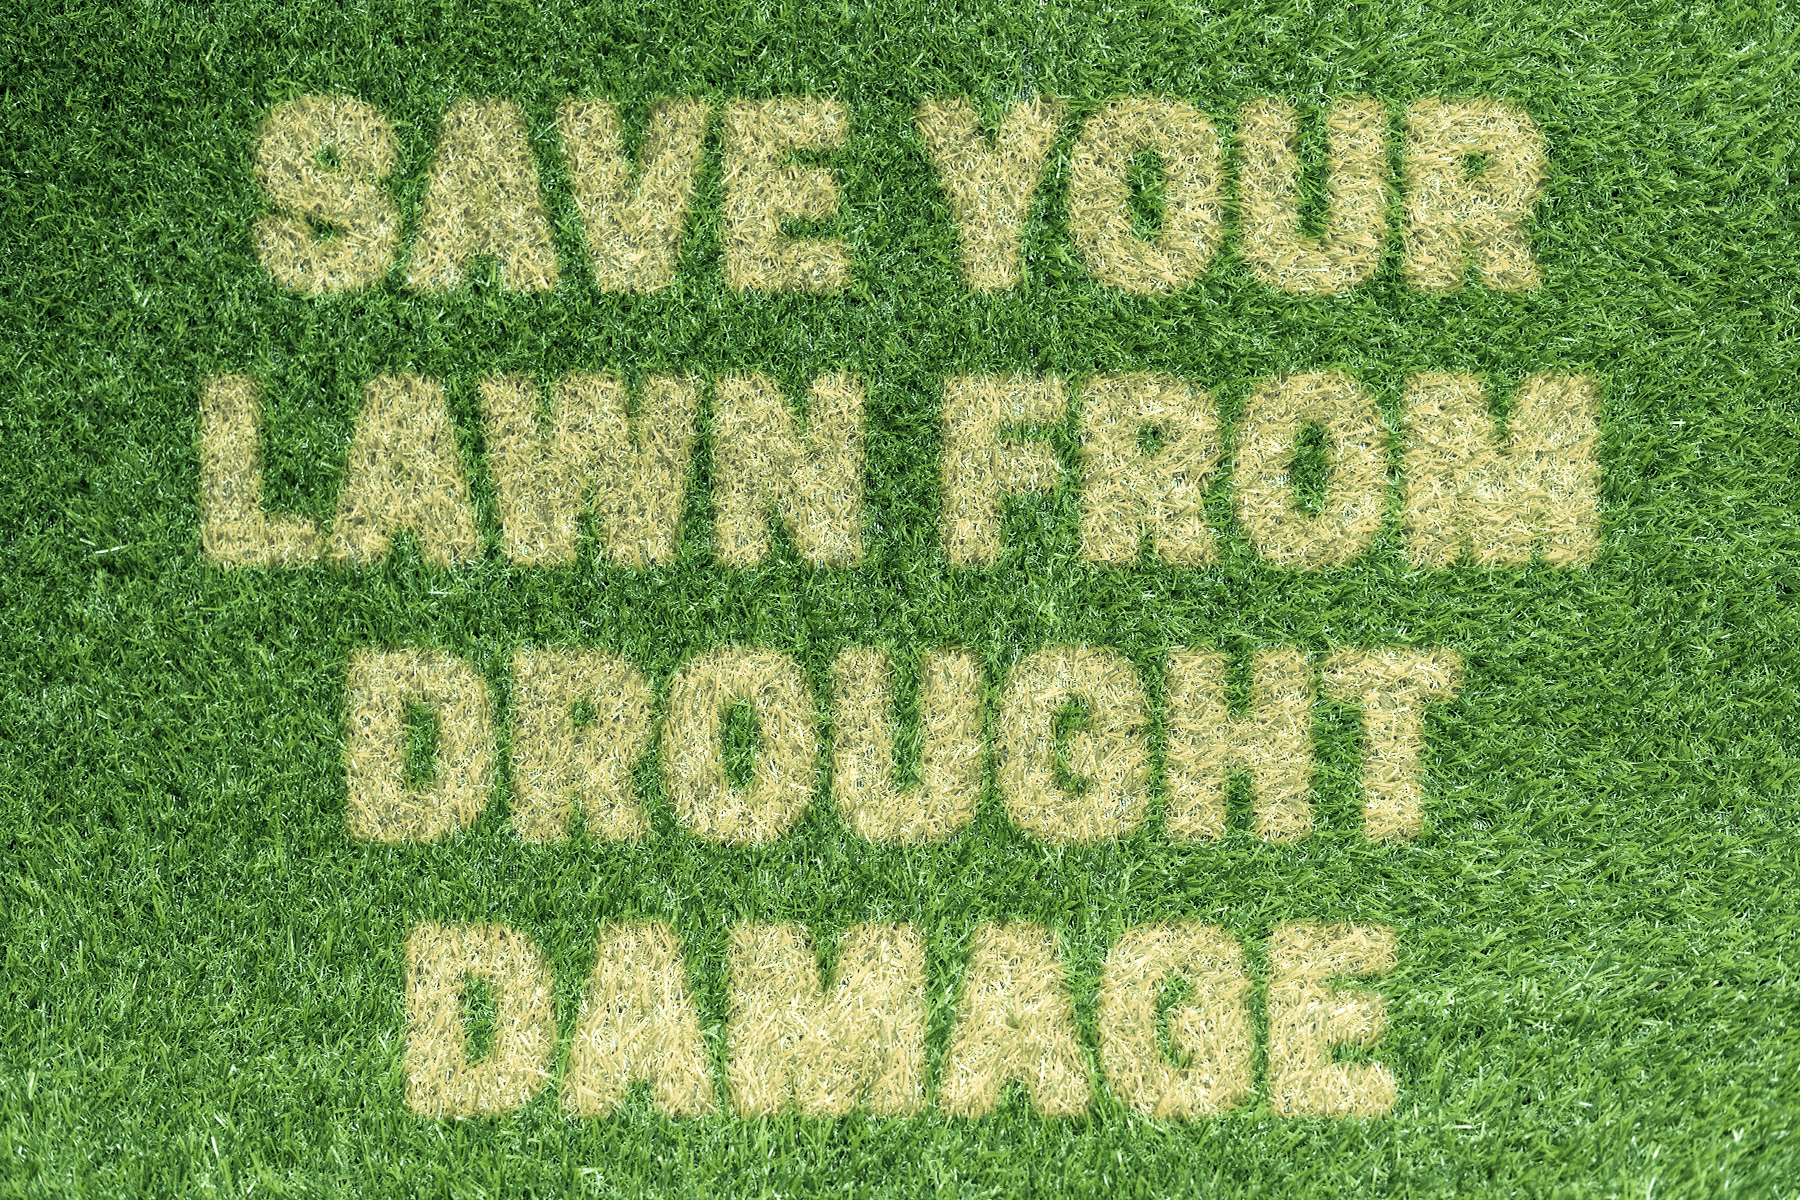 Save Your Lawn from Drought